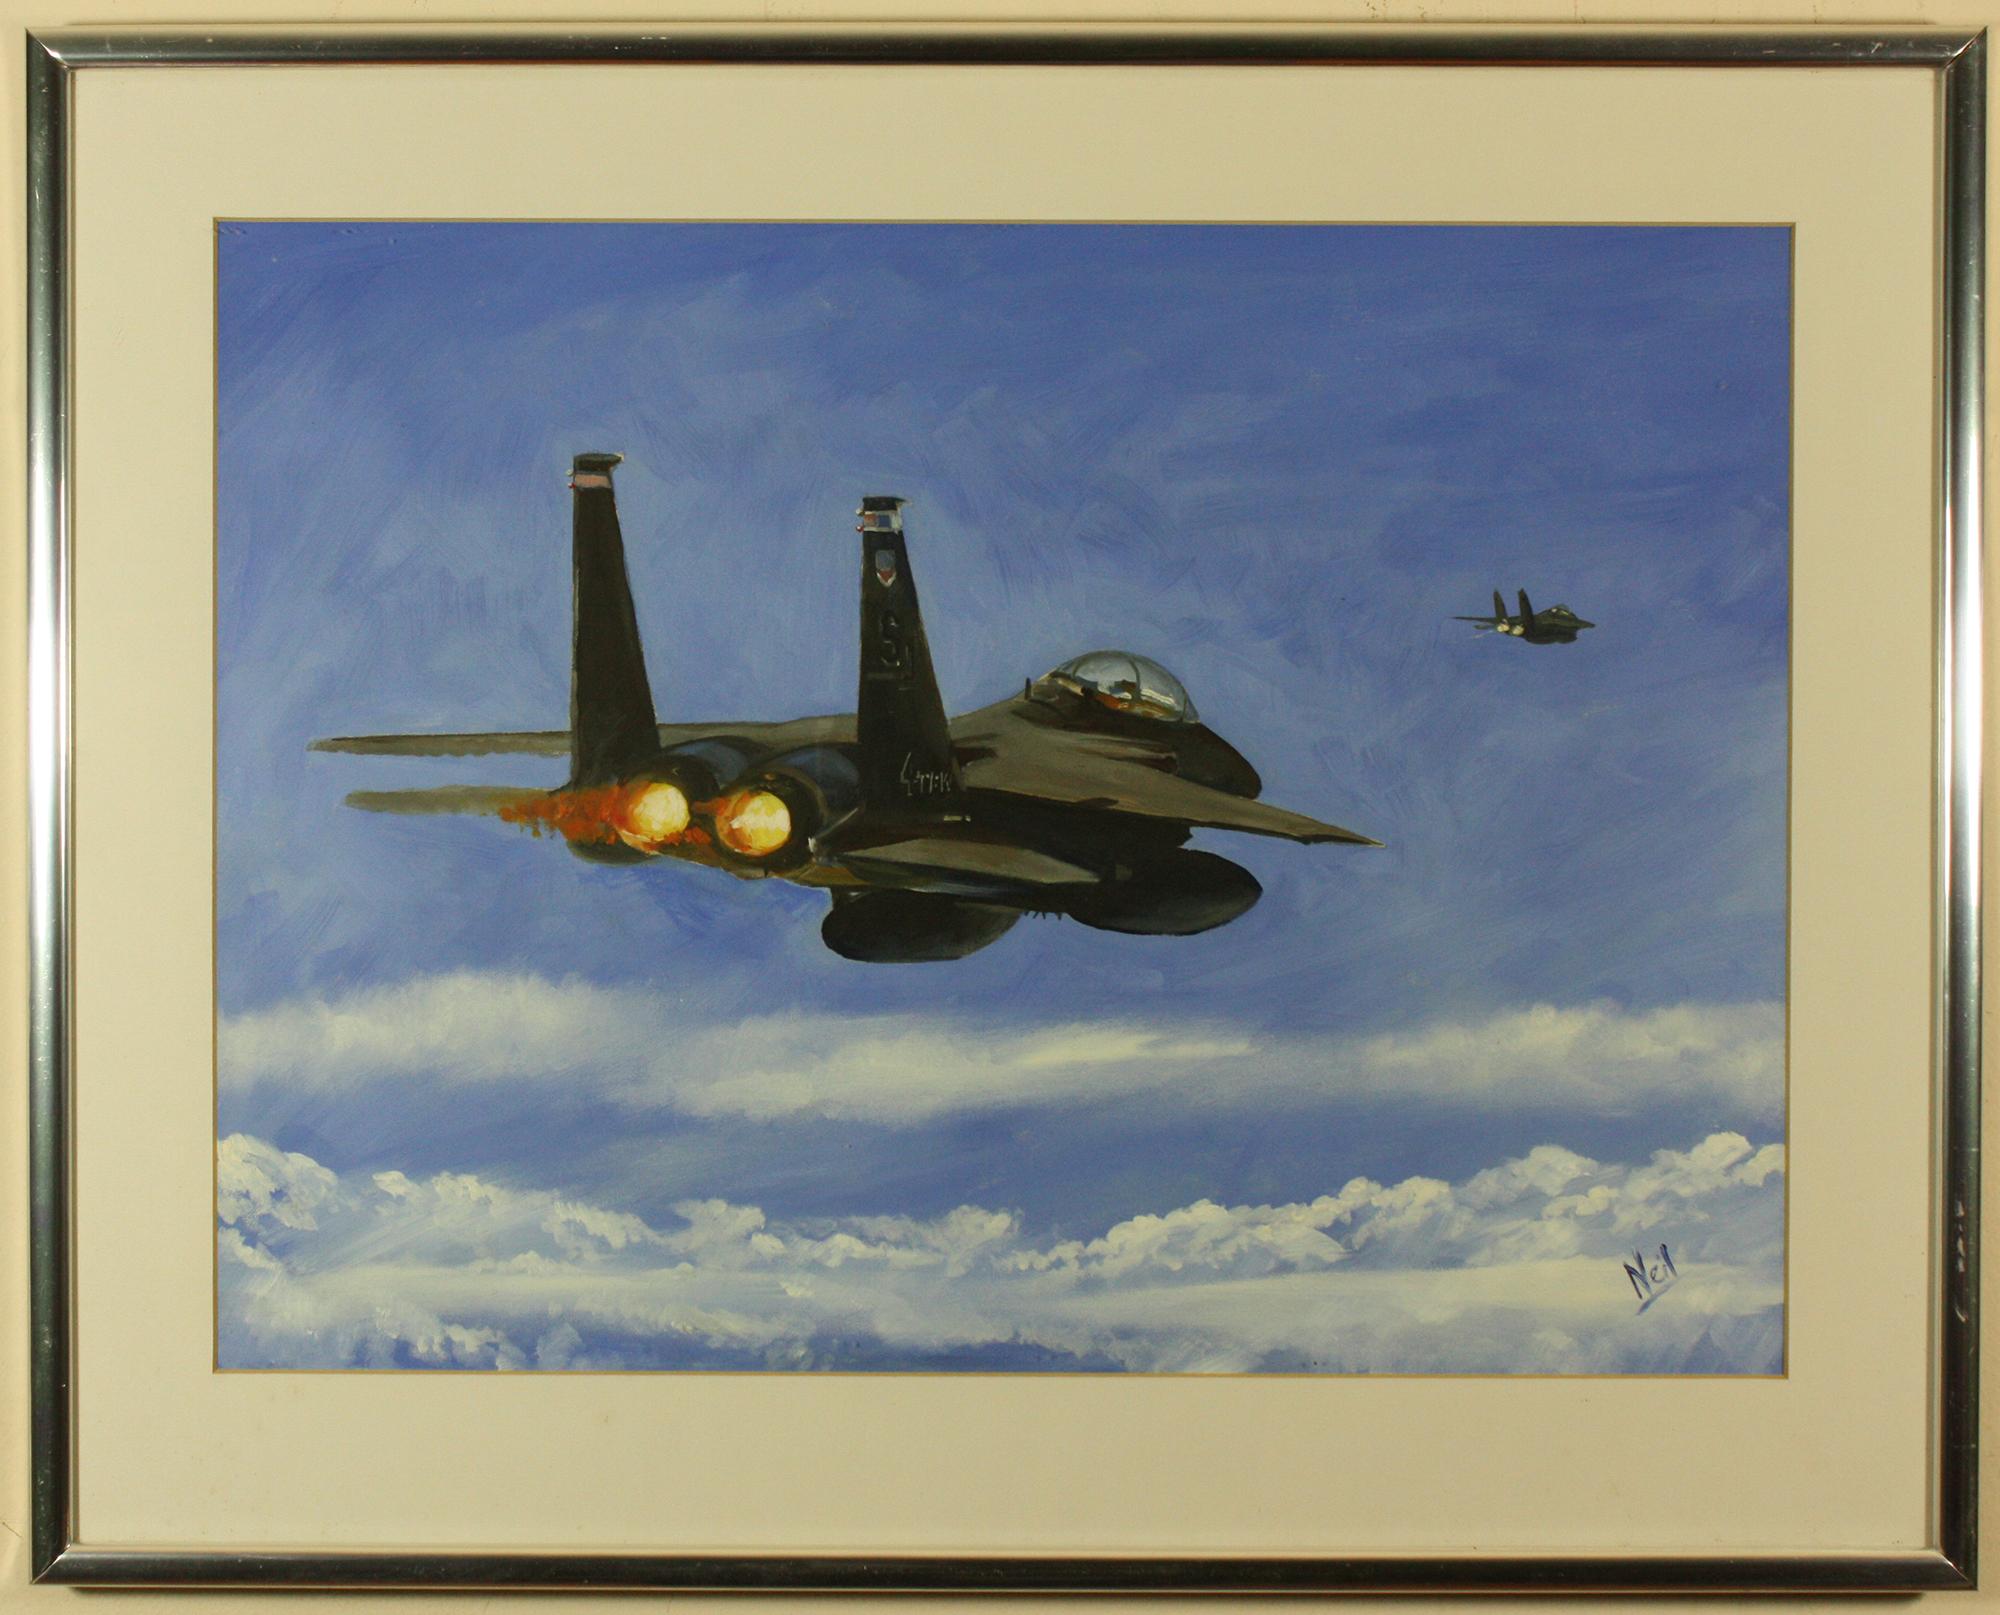 McDonnell Douglas F15 Strike Eagle by Neil Lenard
Acrylic on Paper
Image Size  14.5 ins by 20 ins
Overall Frame Size  20 ins by 25 ins

The F-15E Strike Eagle is a twin-engine, all weather fighter that is the backbone for the Air Force’s air